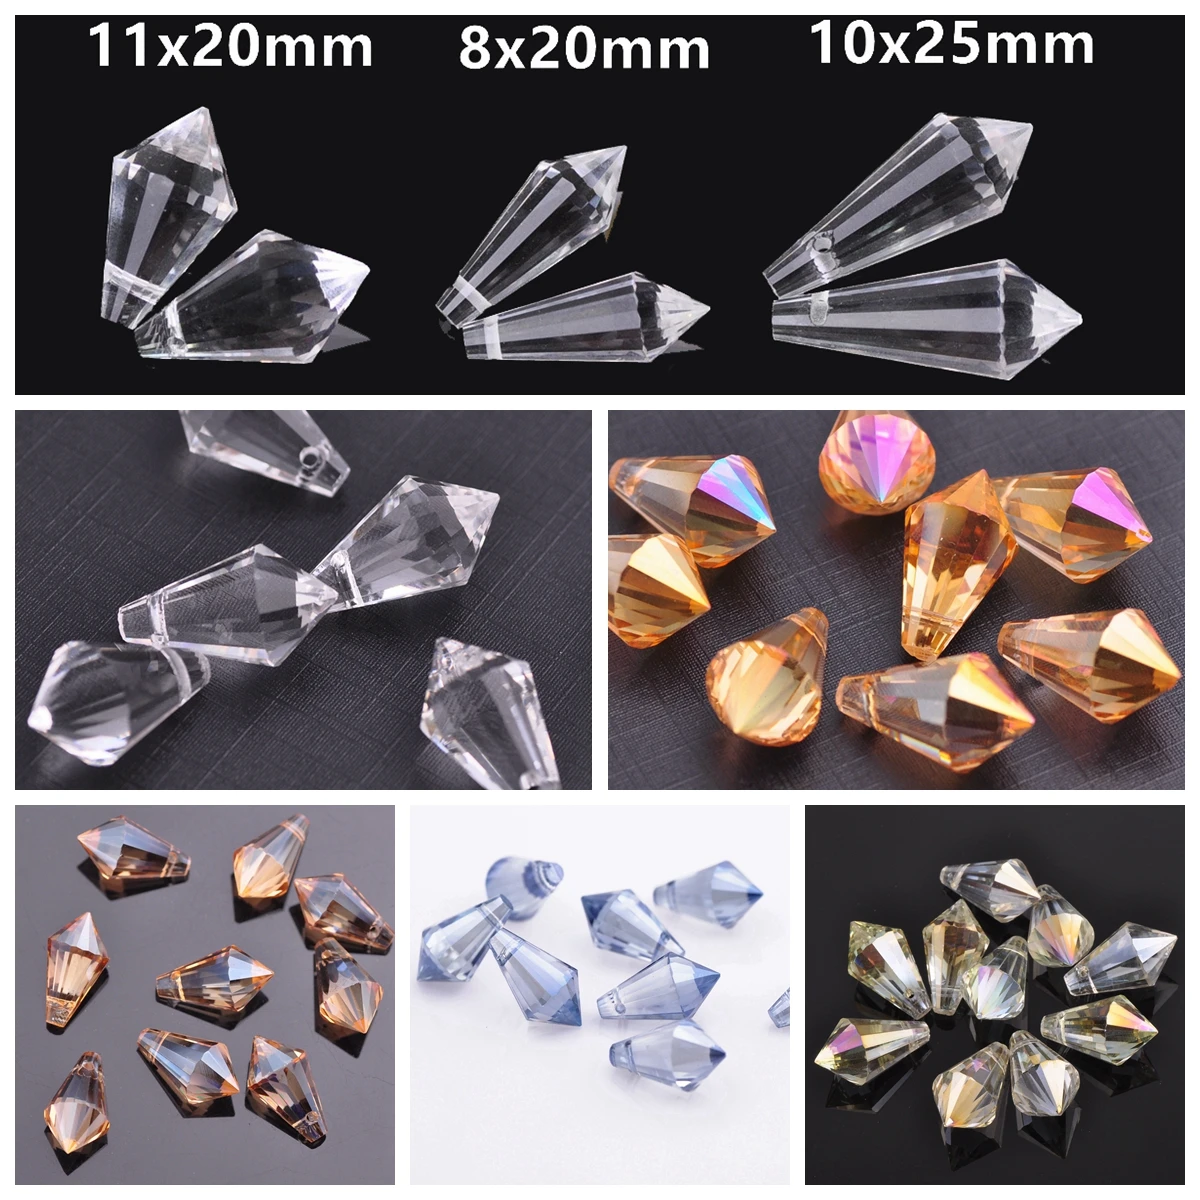 

8x20mm 10x25 11x20mm Teardrop Bicone Prism Faceted Crystal Glass Loose Crafts Pendants Beads Lot For DIY Jewelry Making Findings